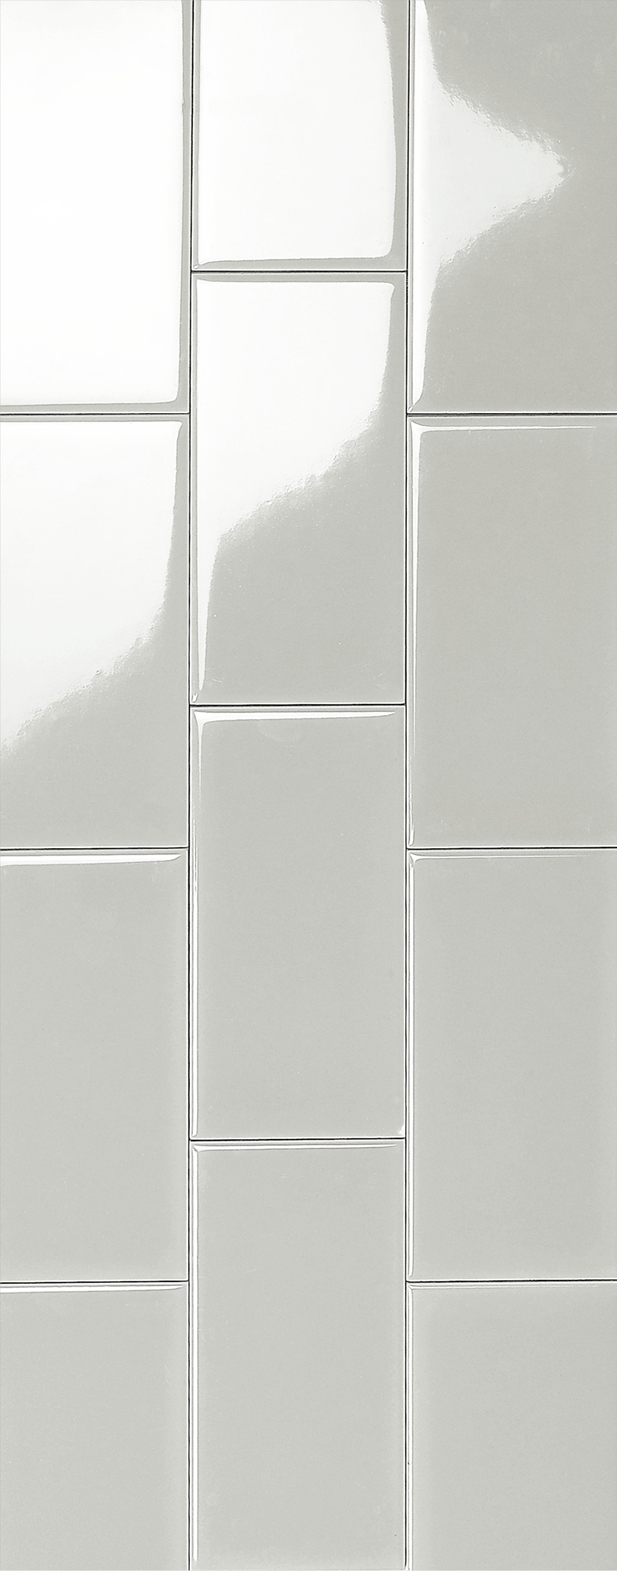 CBM new-arrival white kitchen wall tiles certifications for housing-1